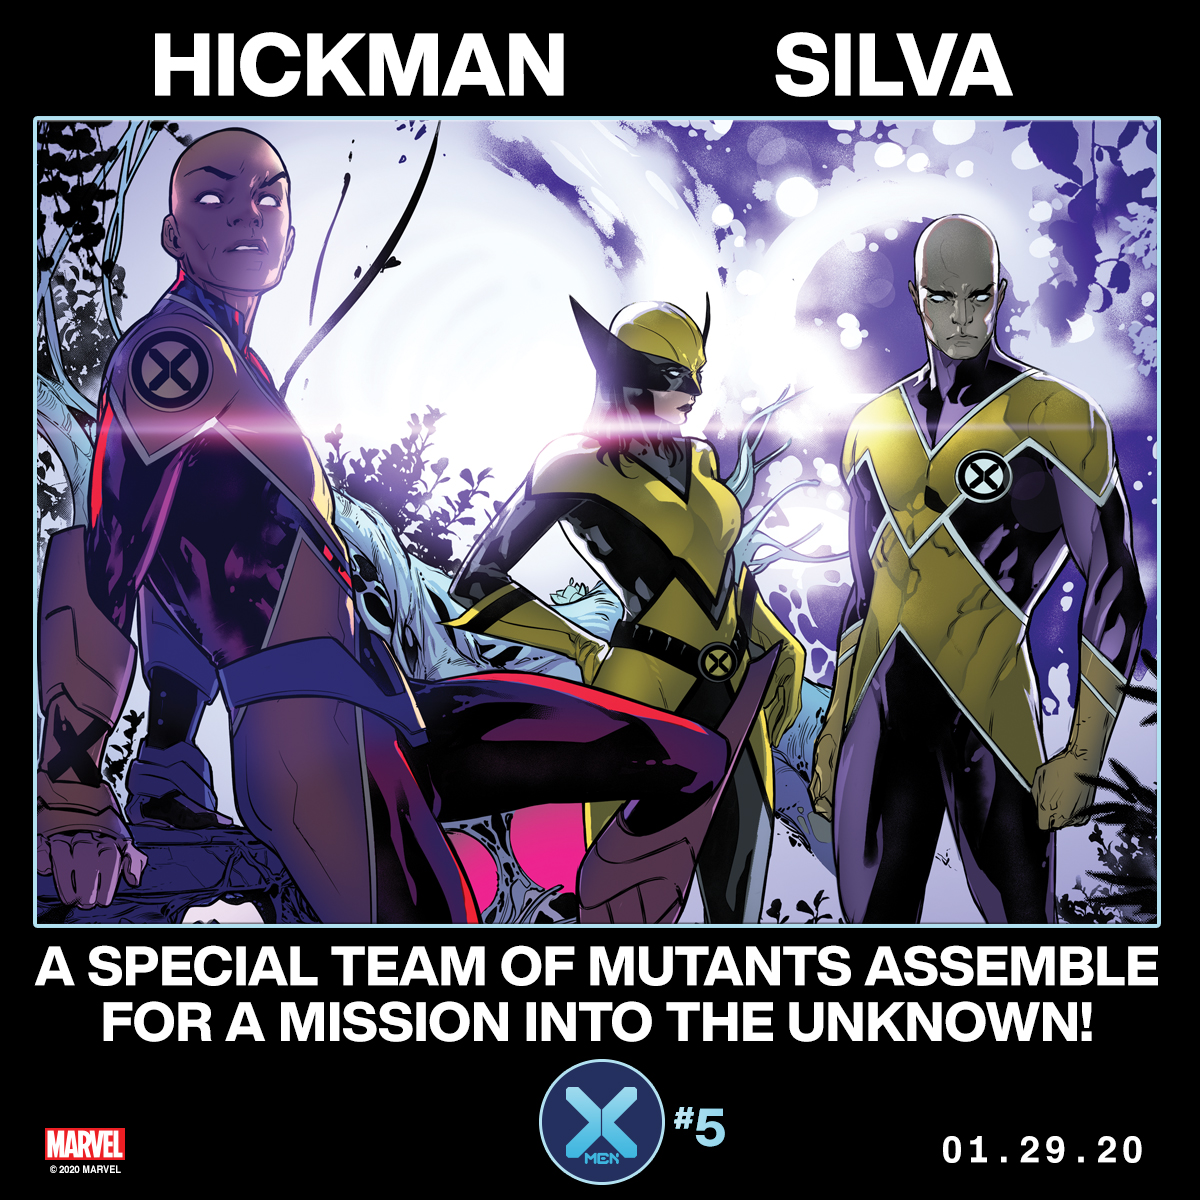 Get hype, Marvel Comics teases "special" team of mutants for 'X-Men' #5